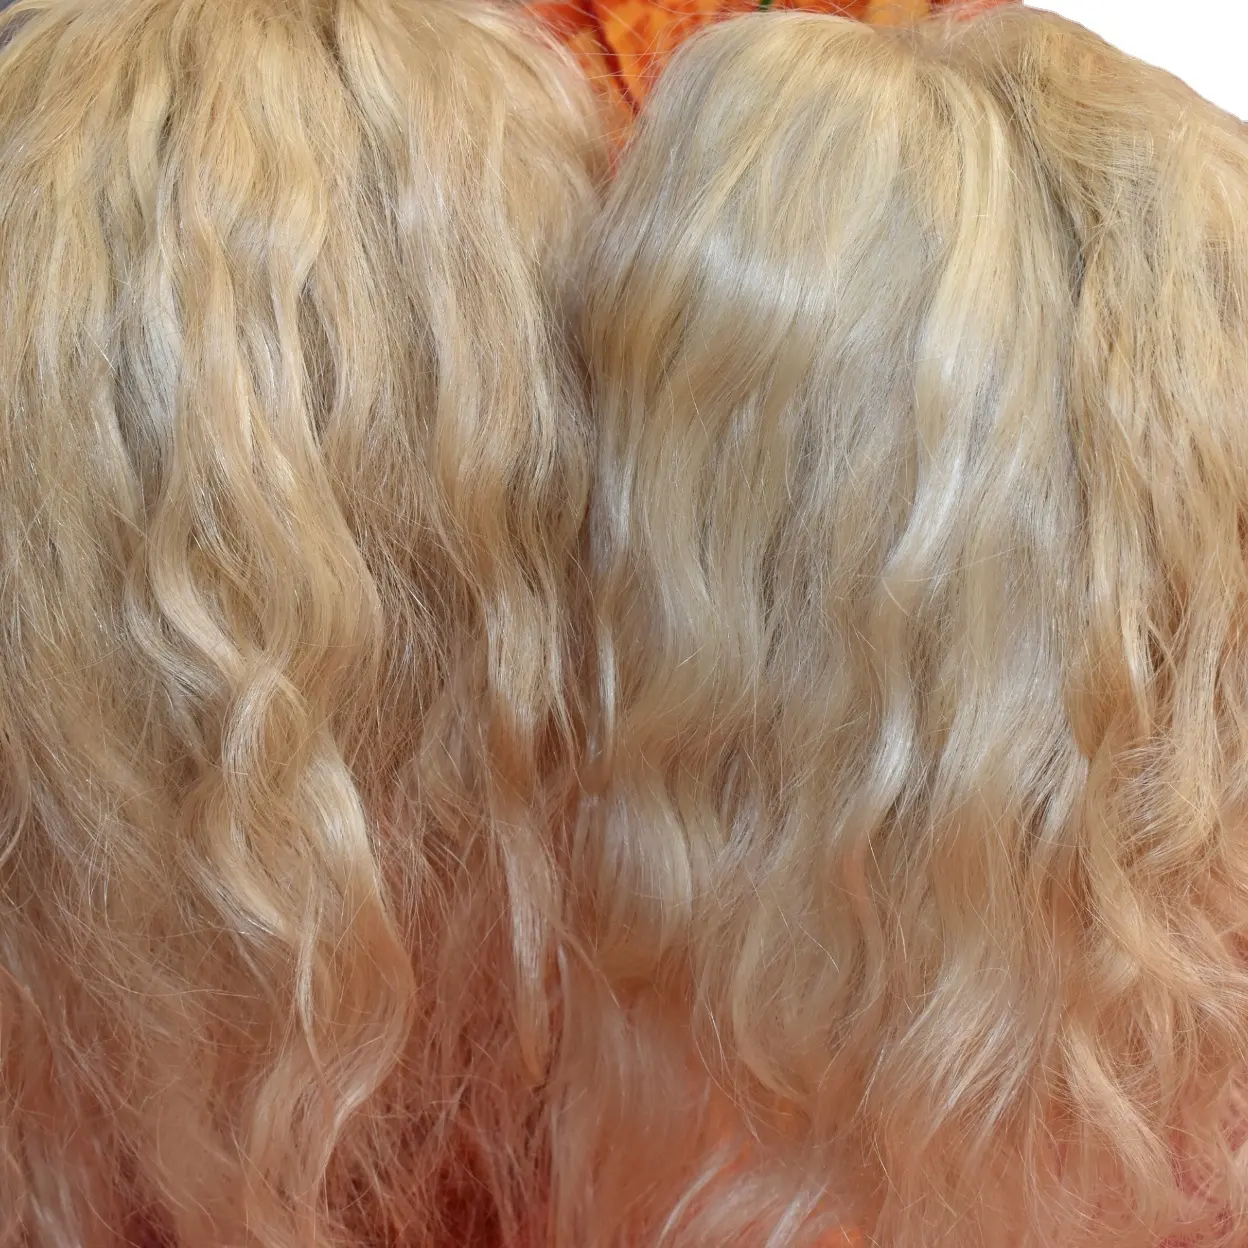 613 Blonde Bundles Wavy Raw Indian cuticle aligned manufactures natural color genius weft hair Human Hair